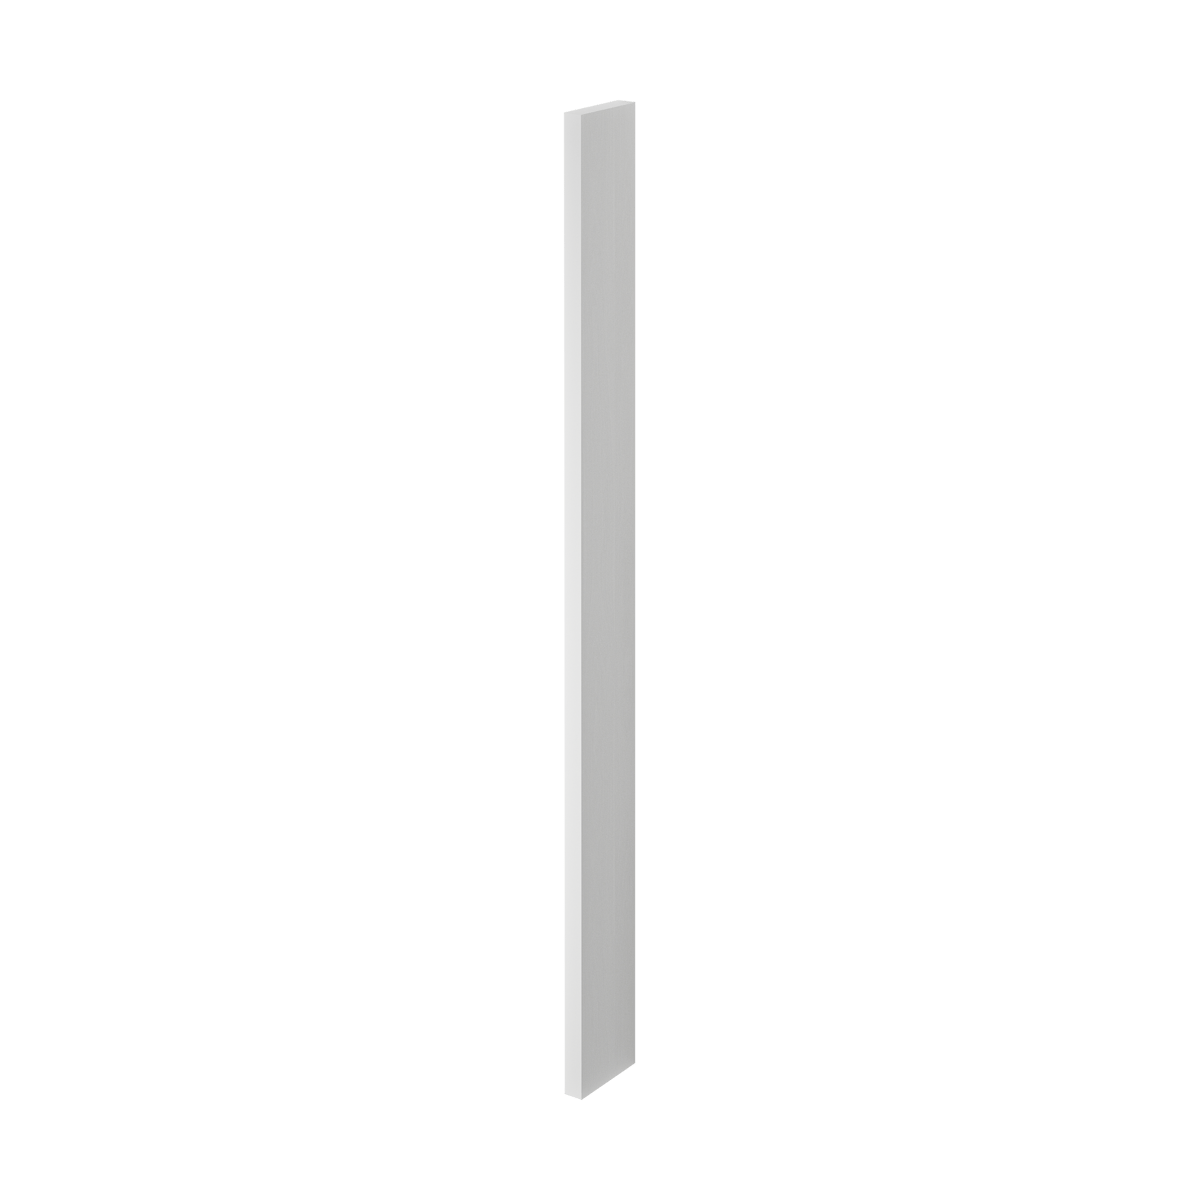 Massproductions Gridlock Side Panel H1460 White stained Ash